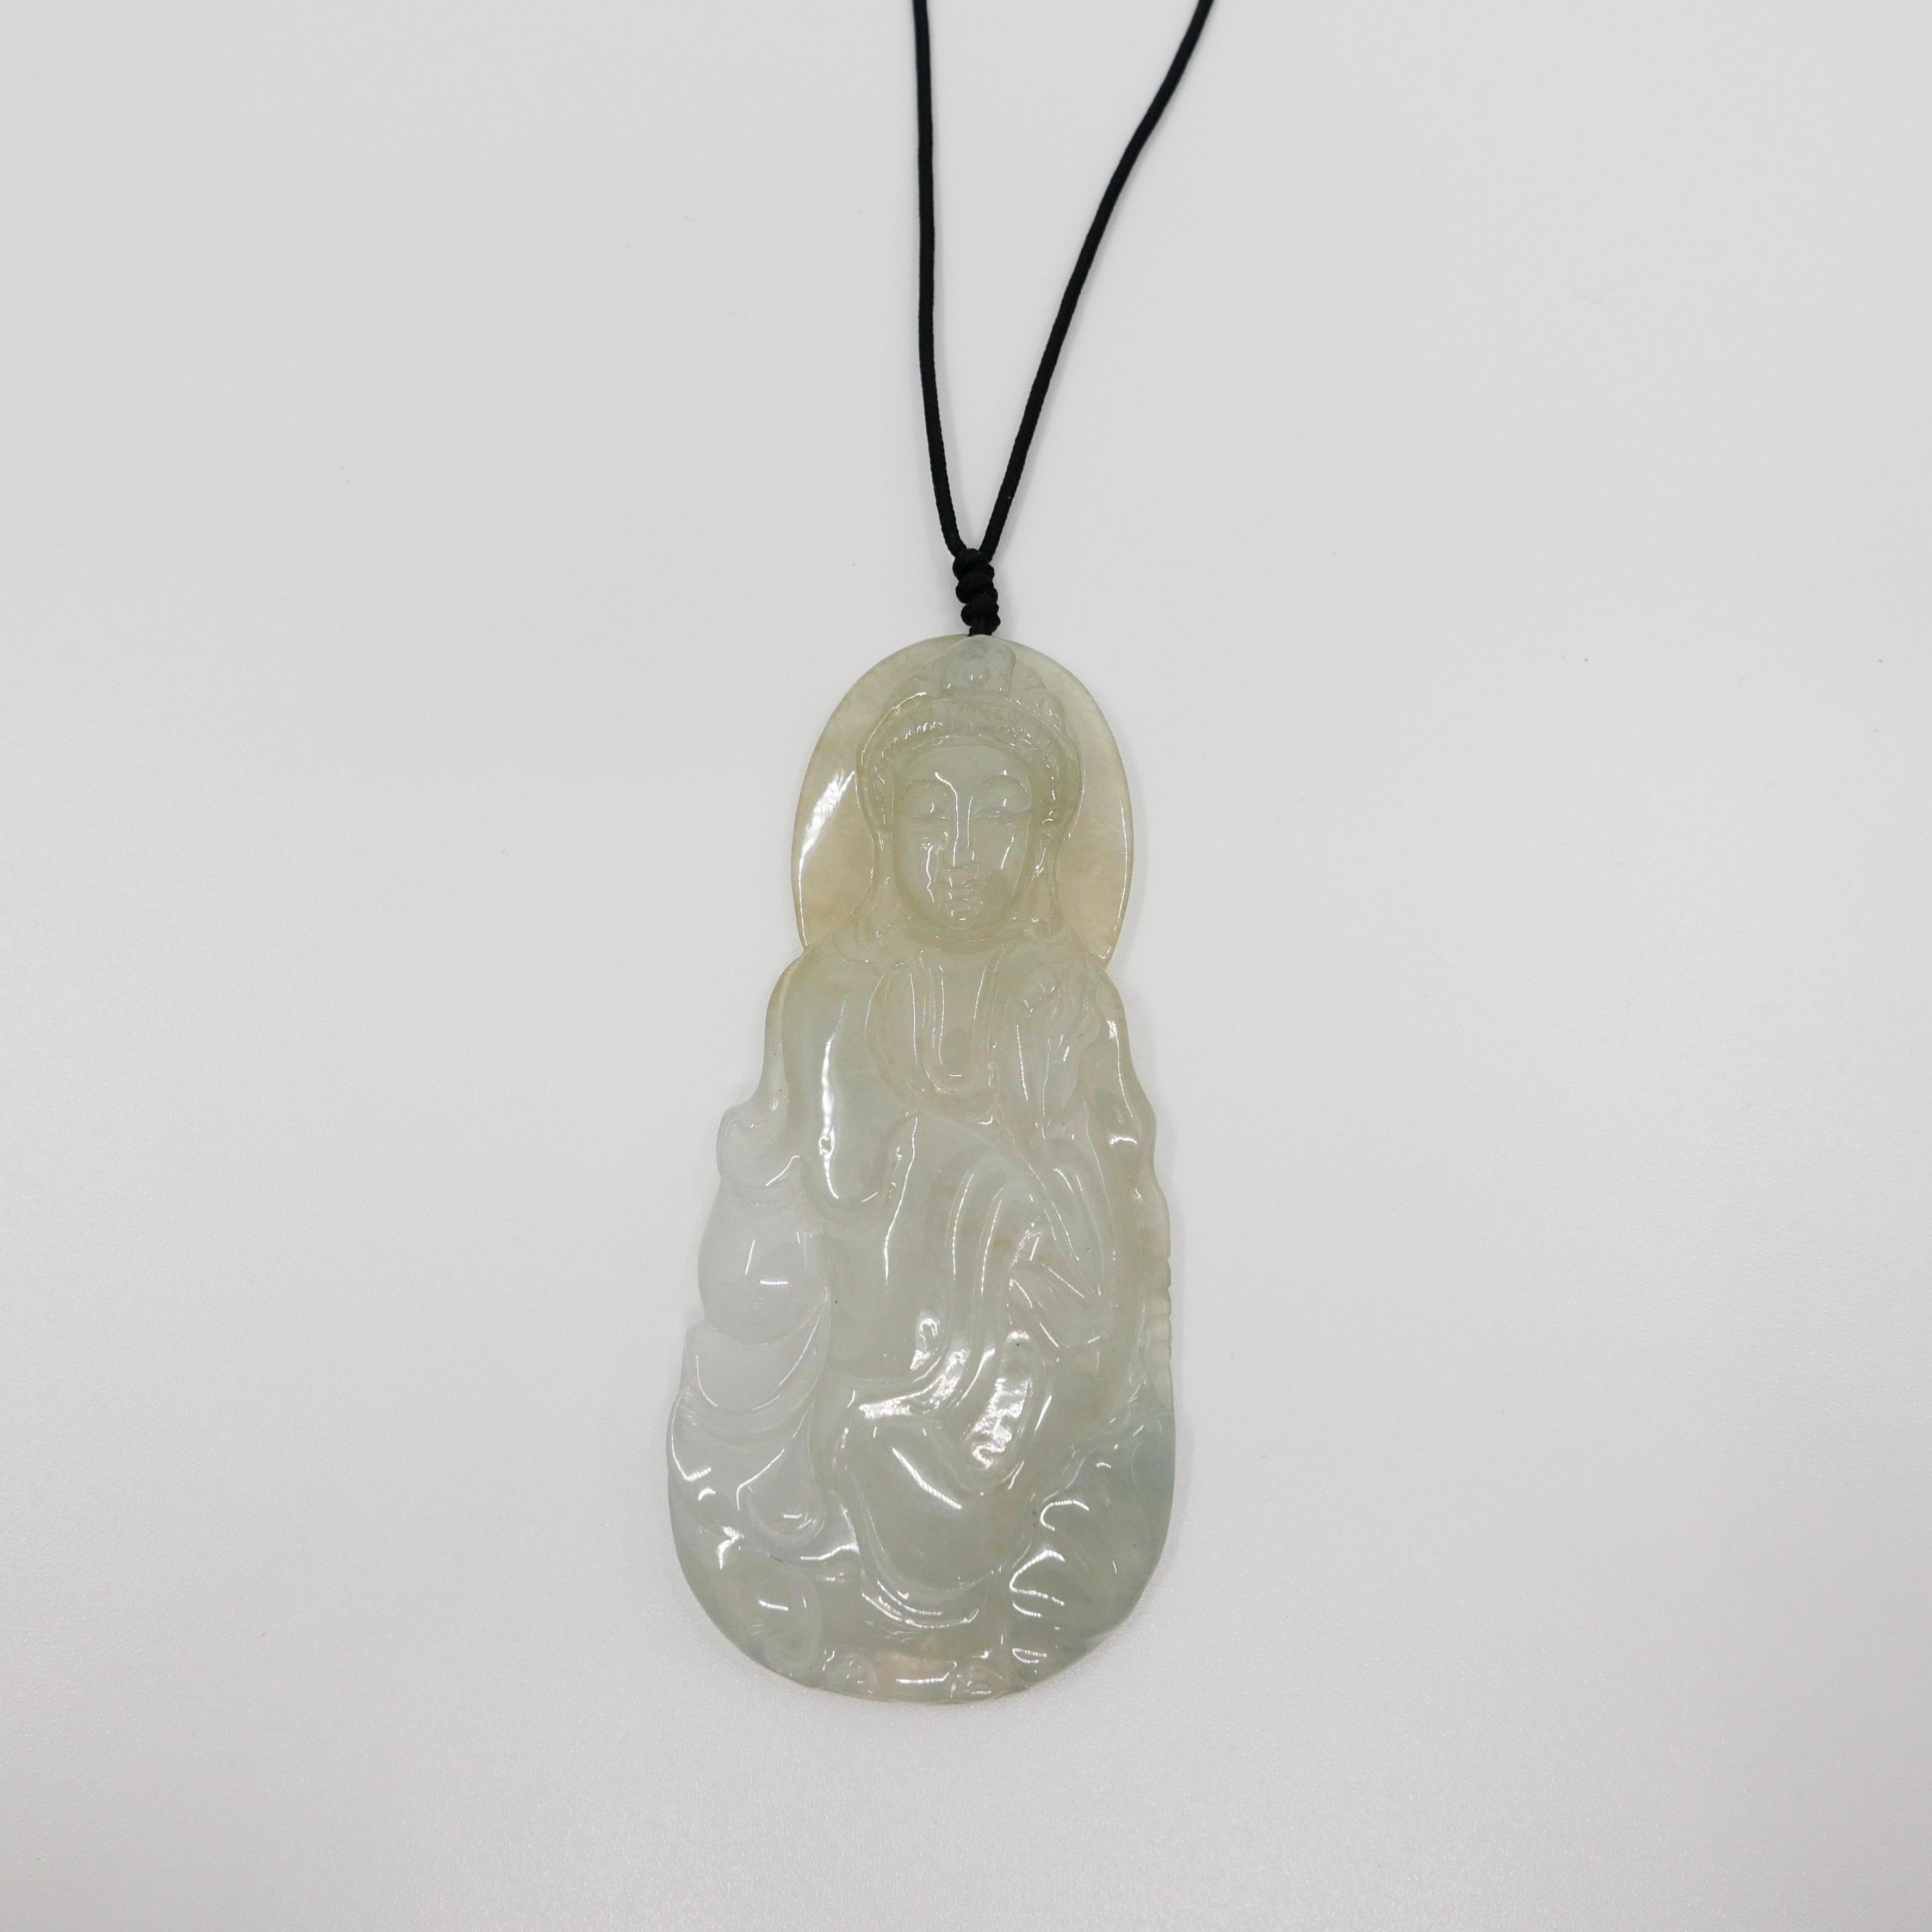 Rough Cut Certified Natural Icy Jadeite Jade Pendant Necklace, Kwan Yin, Unisex For Sale